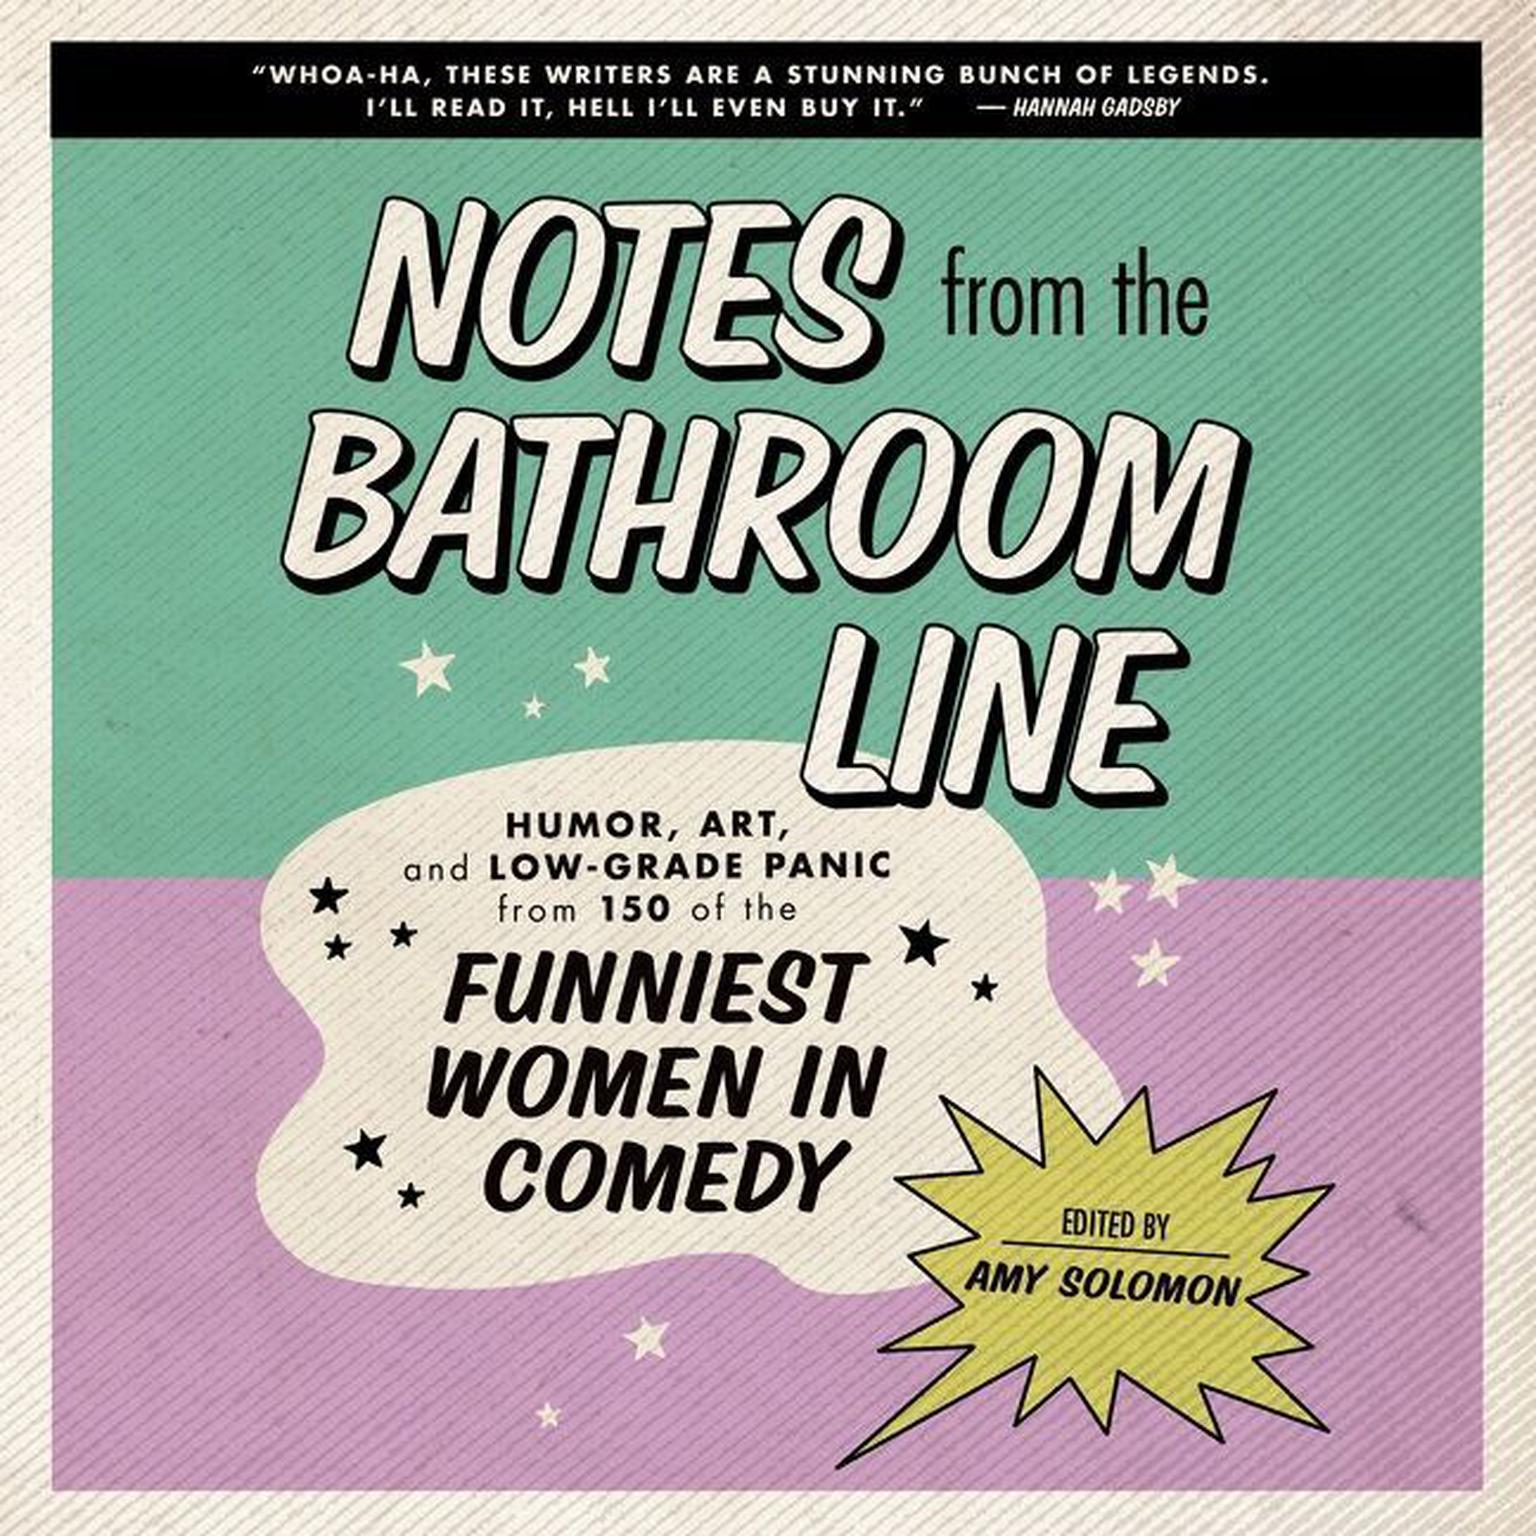 Notes From the Bathroom Line: Humor, Art, and Low-grade Panic from 150 of the Funniest Women in Comedy Audiobook, by Amy Solomon